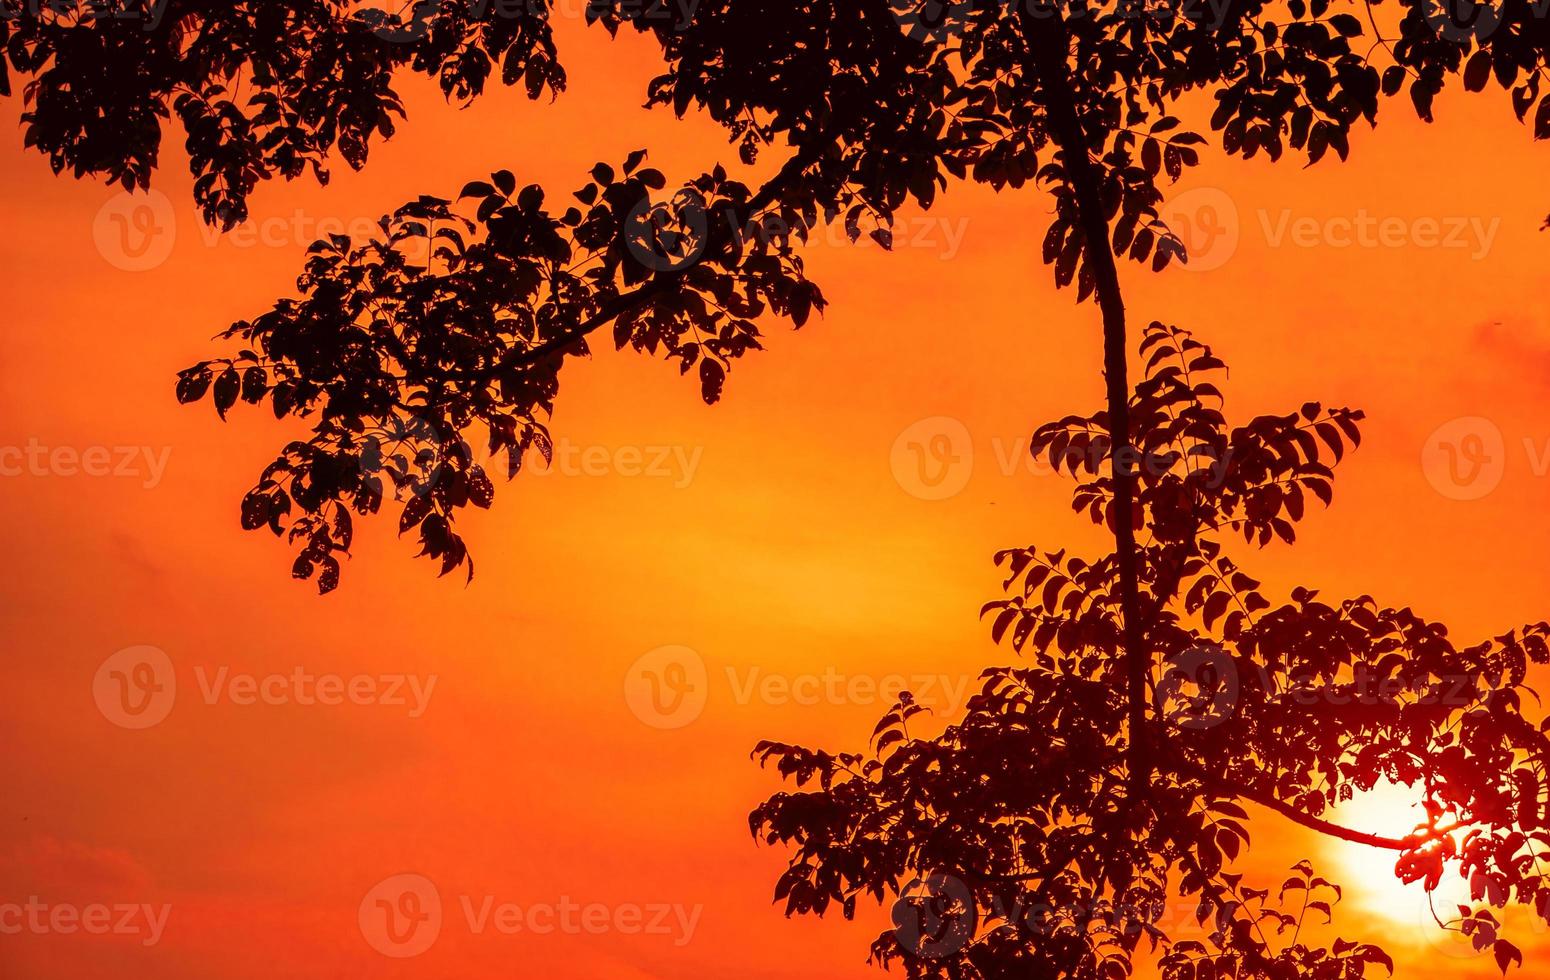 tree branches silhouette background with orange sunset sky photo